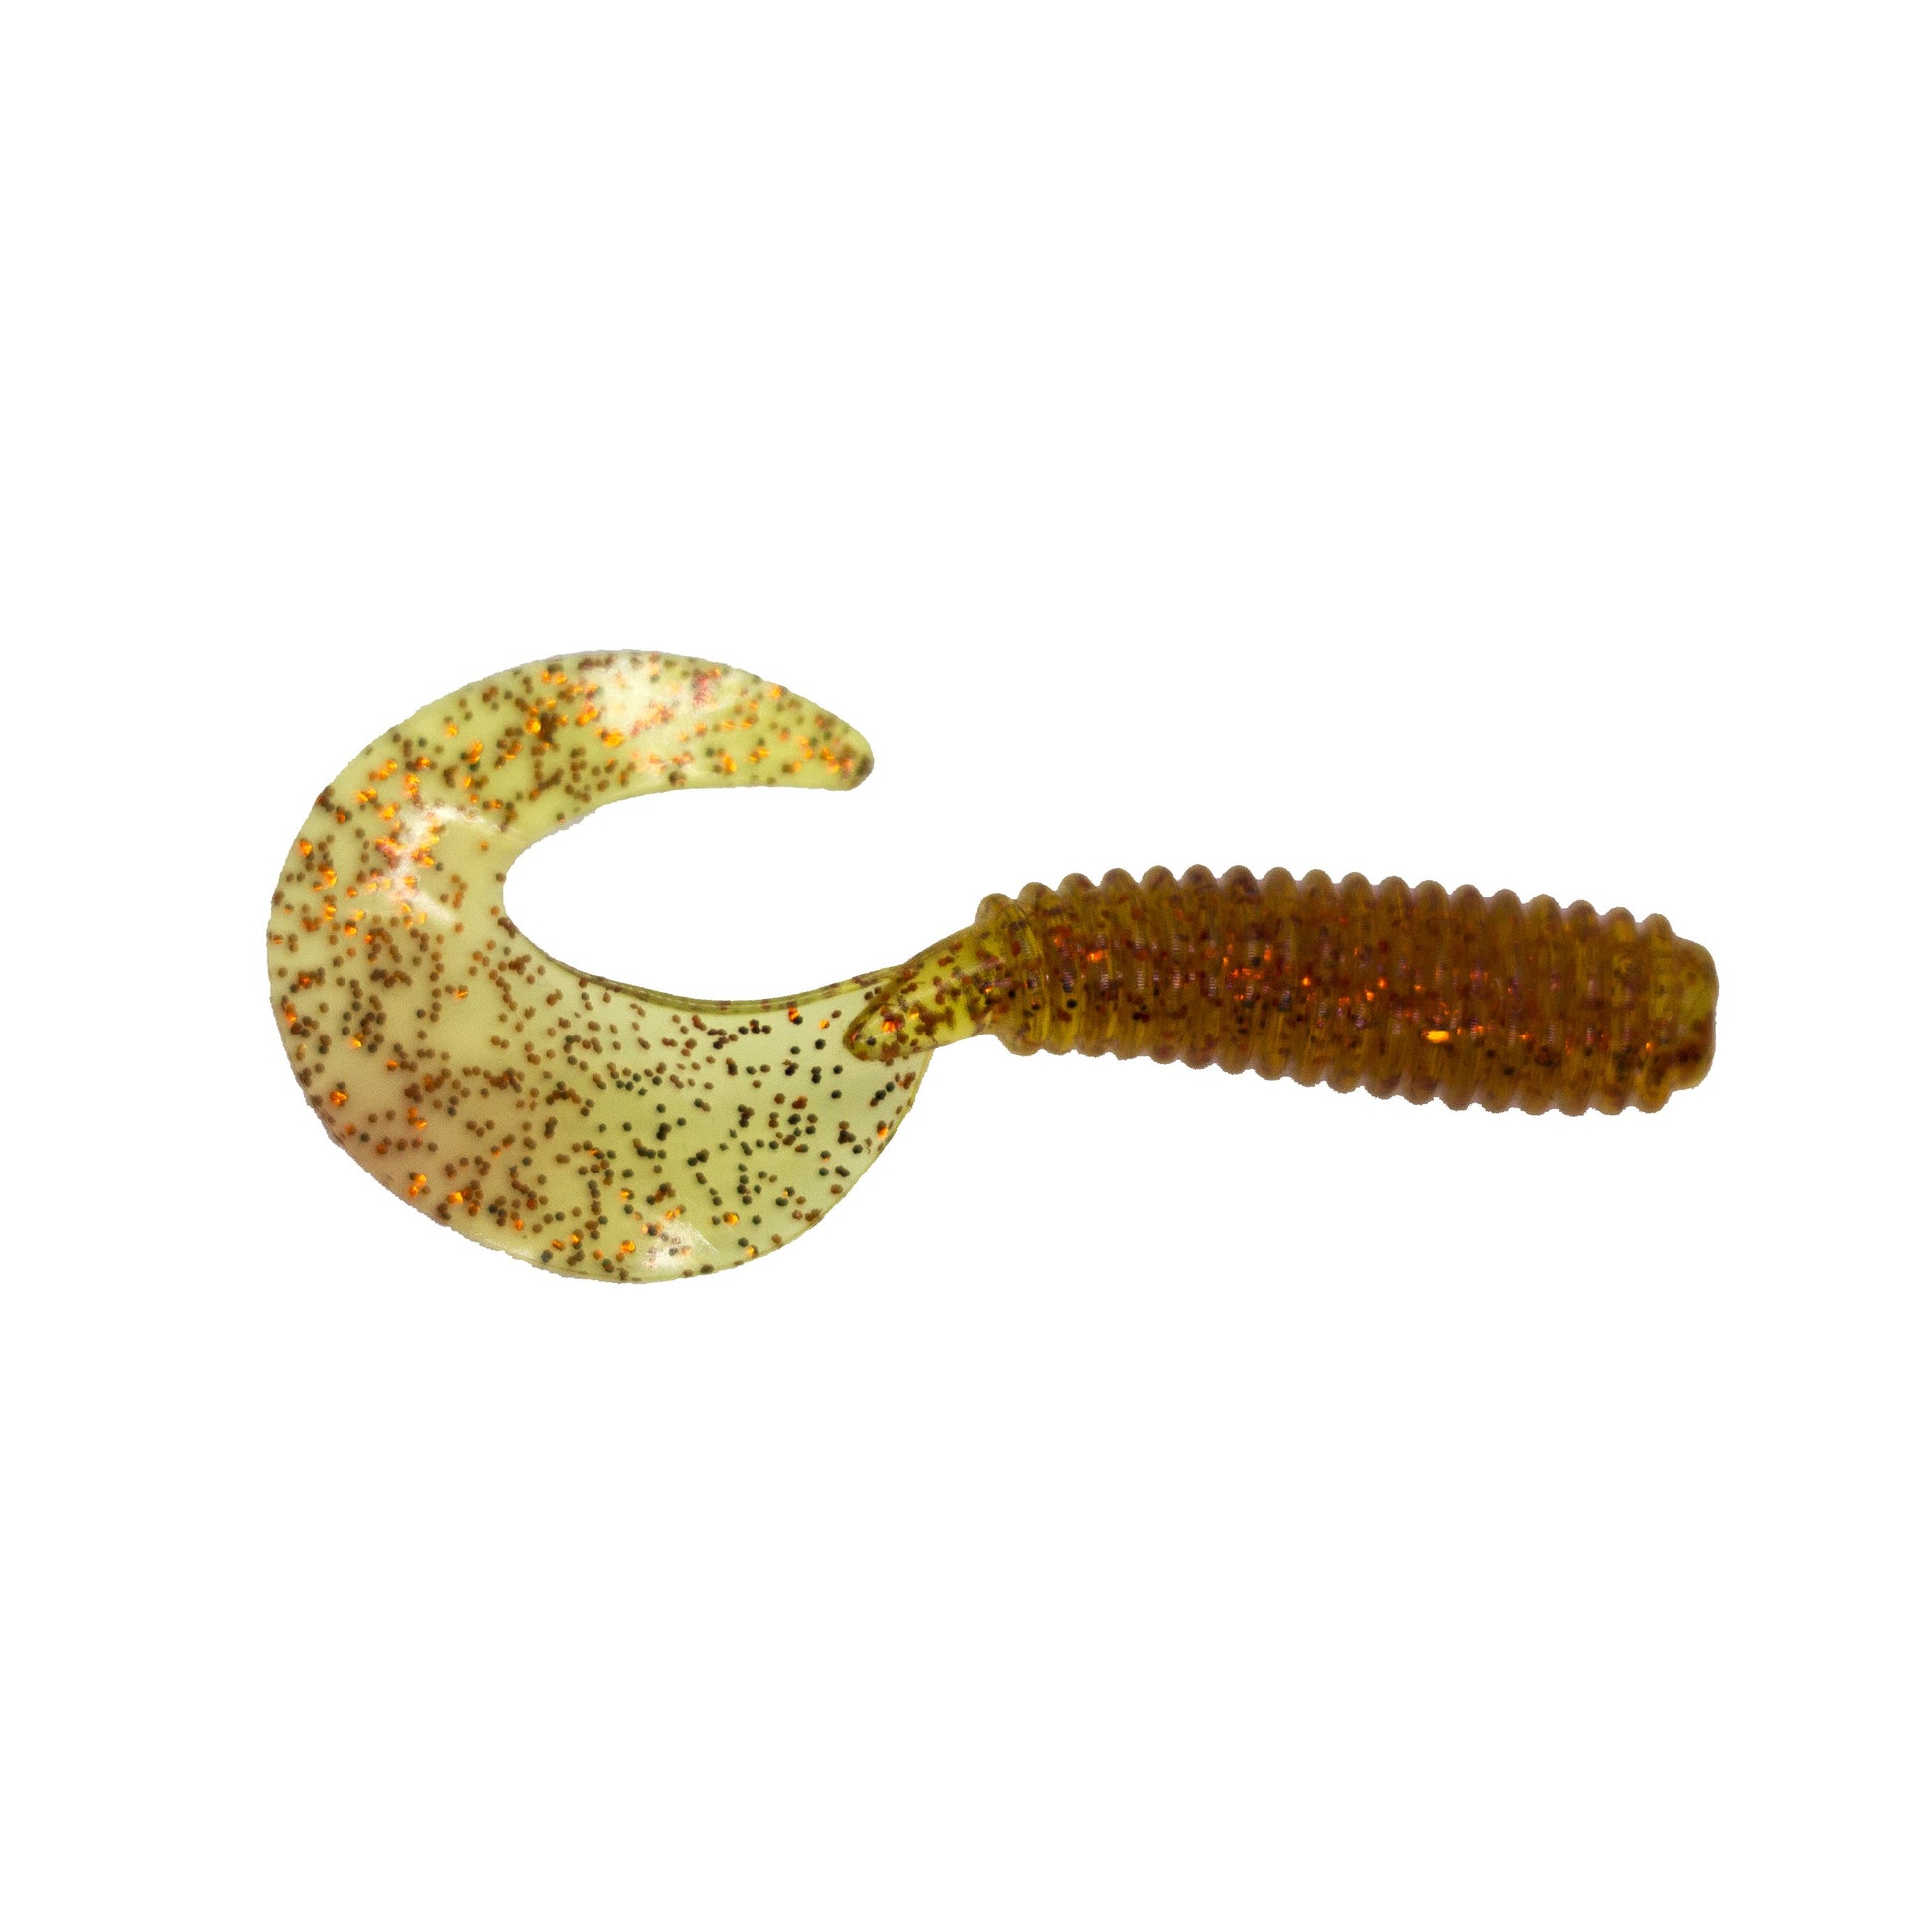 Fishing Depot Dusted Curl Tail Grub Twister, 2.5-in - Discount